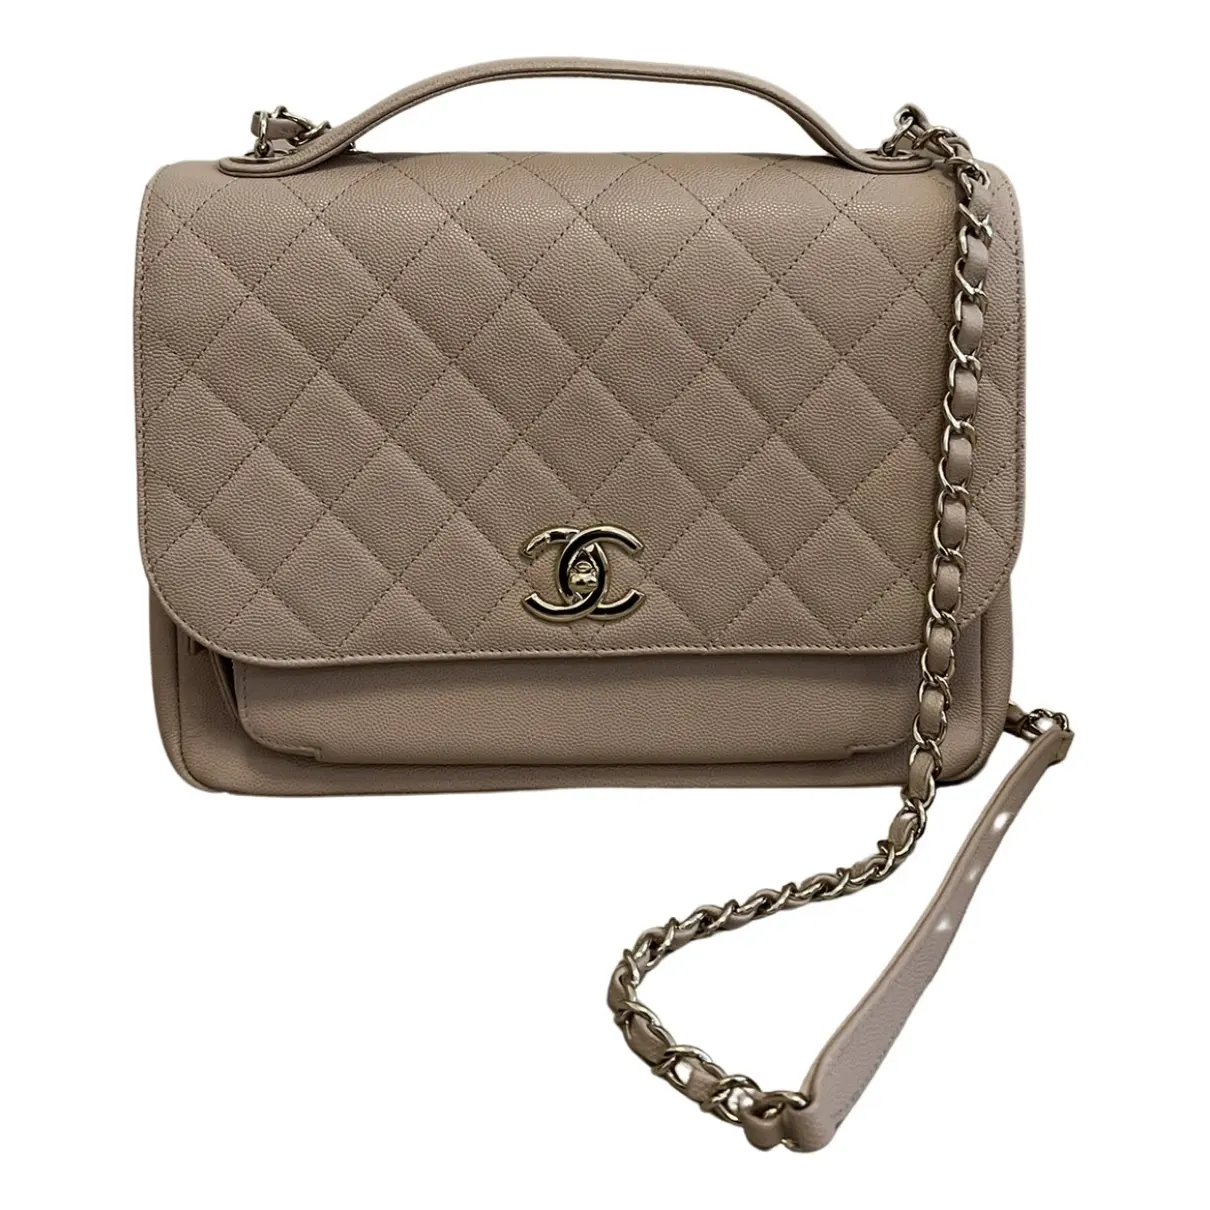 Business Affinity leather crossbody bag Chanel